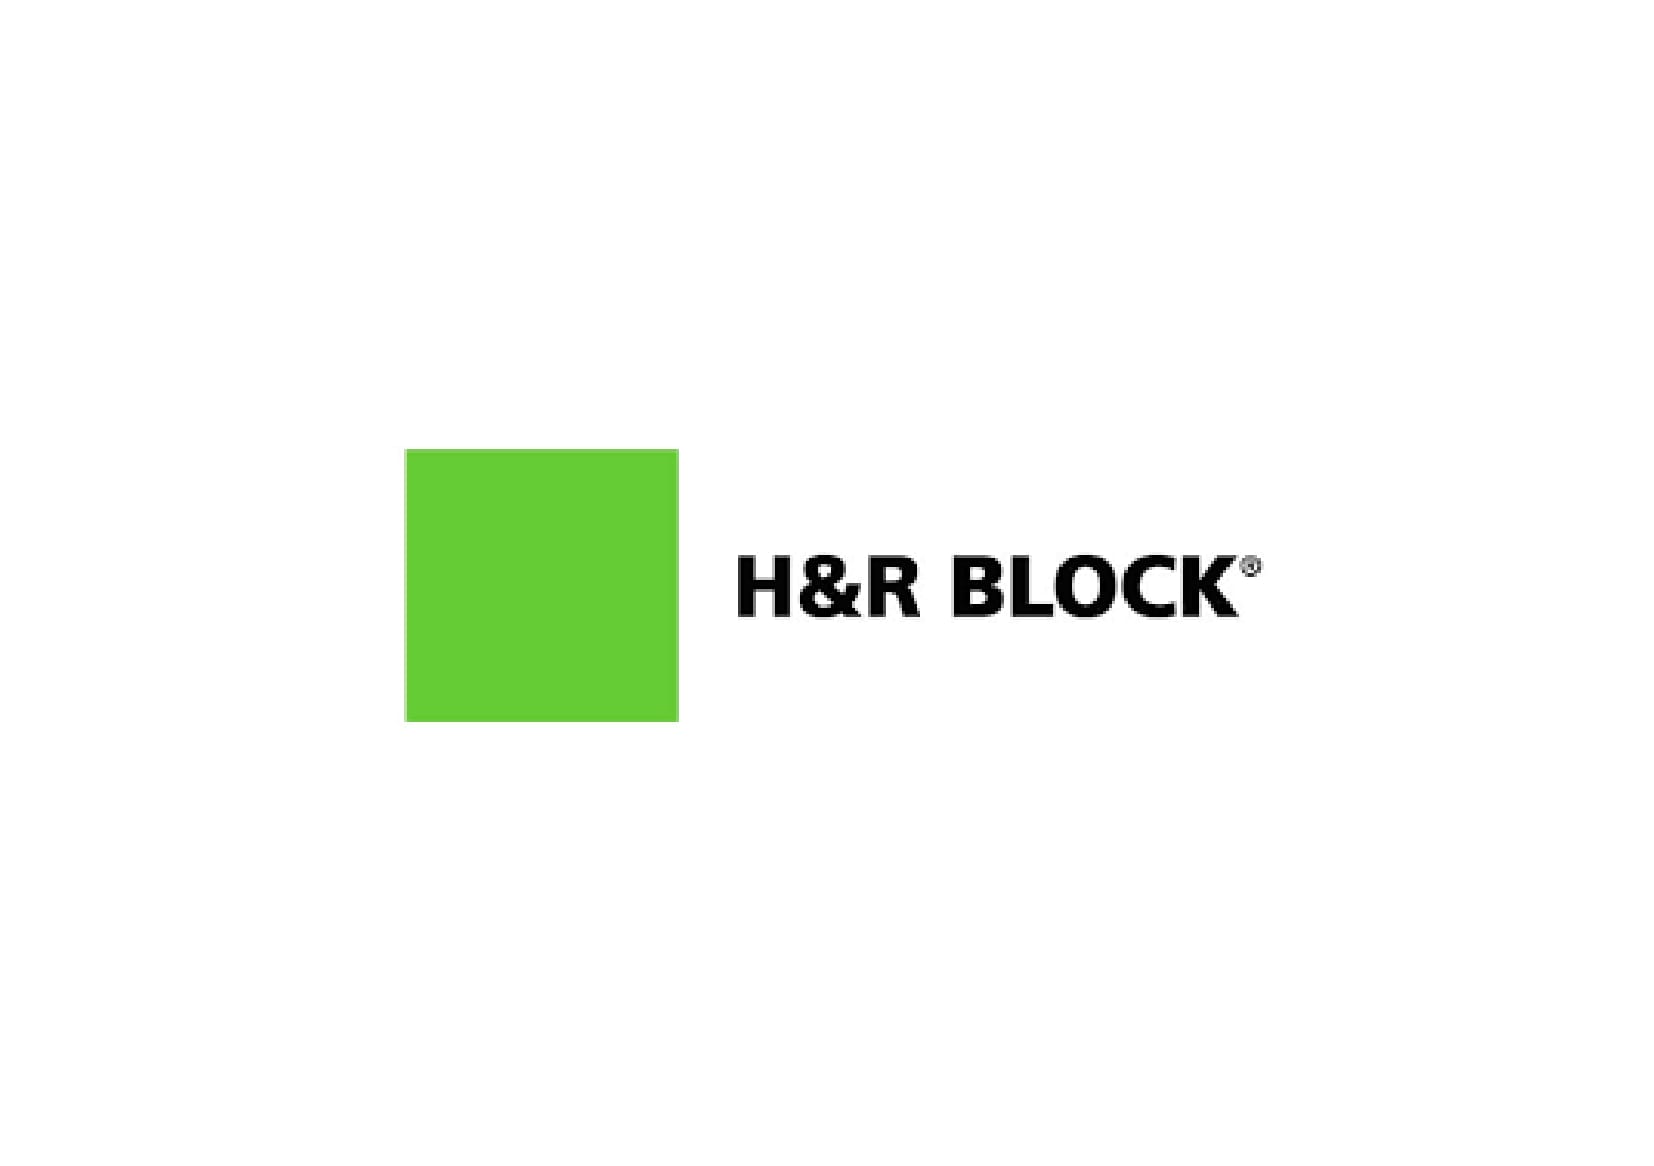 H&R Block (India) Private Limited is the wholly-owned Indian subsidiary of H&R Block Inc. It provides tax services like Expert Tax Preparation, Free Self-Income Tax Filing, In Person Tax Filing, NRI Tax Filing, US Tax Filing in India, Tax Consultation to individuals including non-residents (NRIs) and expatriates. It has become the largest individual tax services company in India in a short span of 4 years. www.hrblock.in